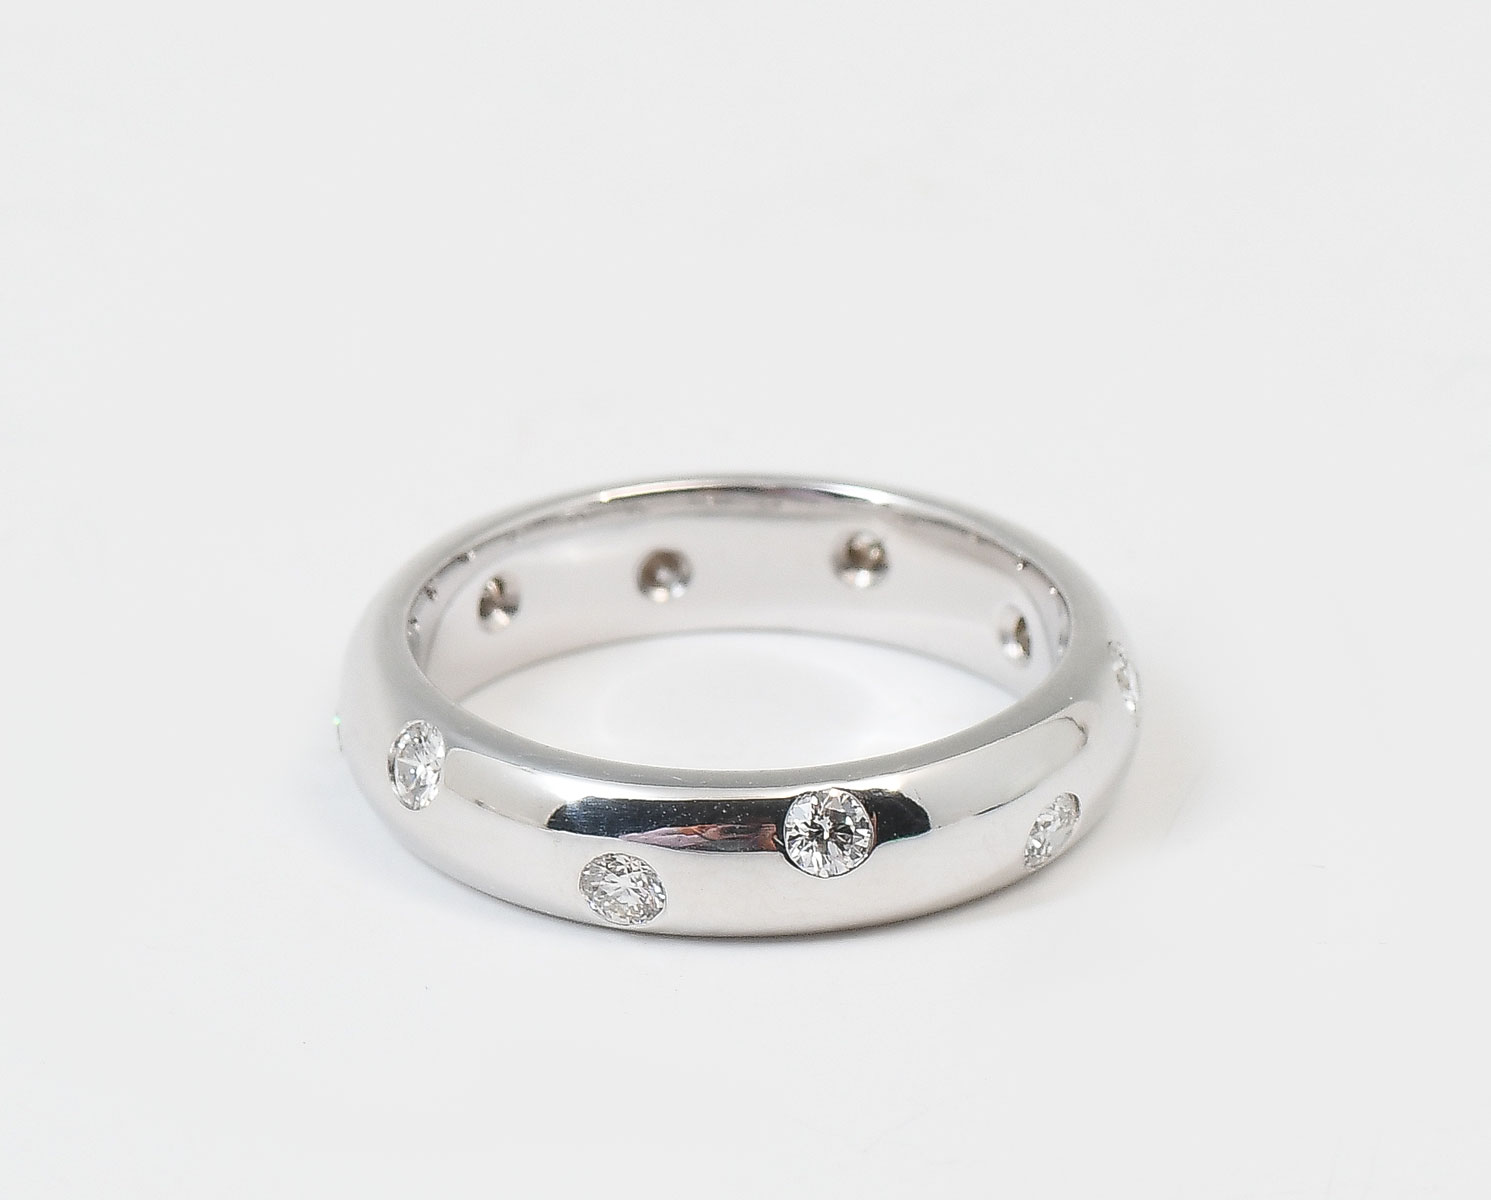 14K 5MM DOMED BAND WITH DIAMONDS: